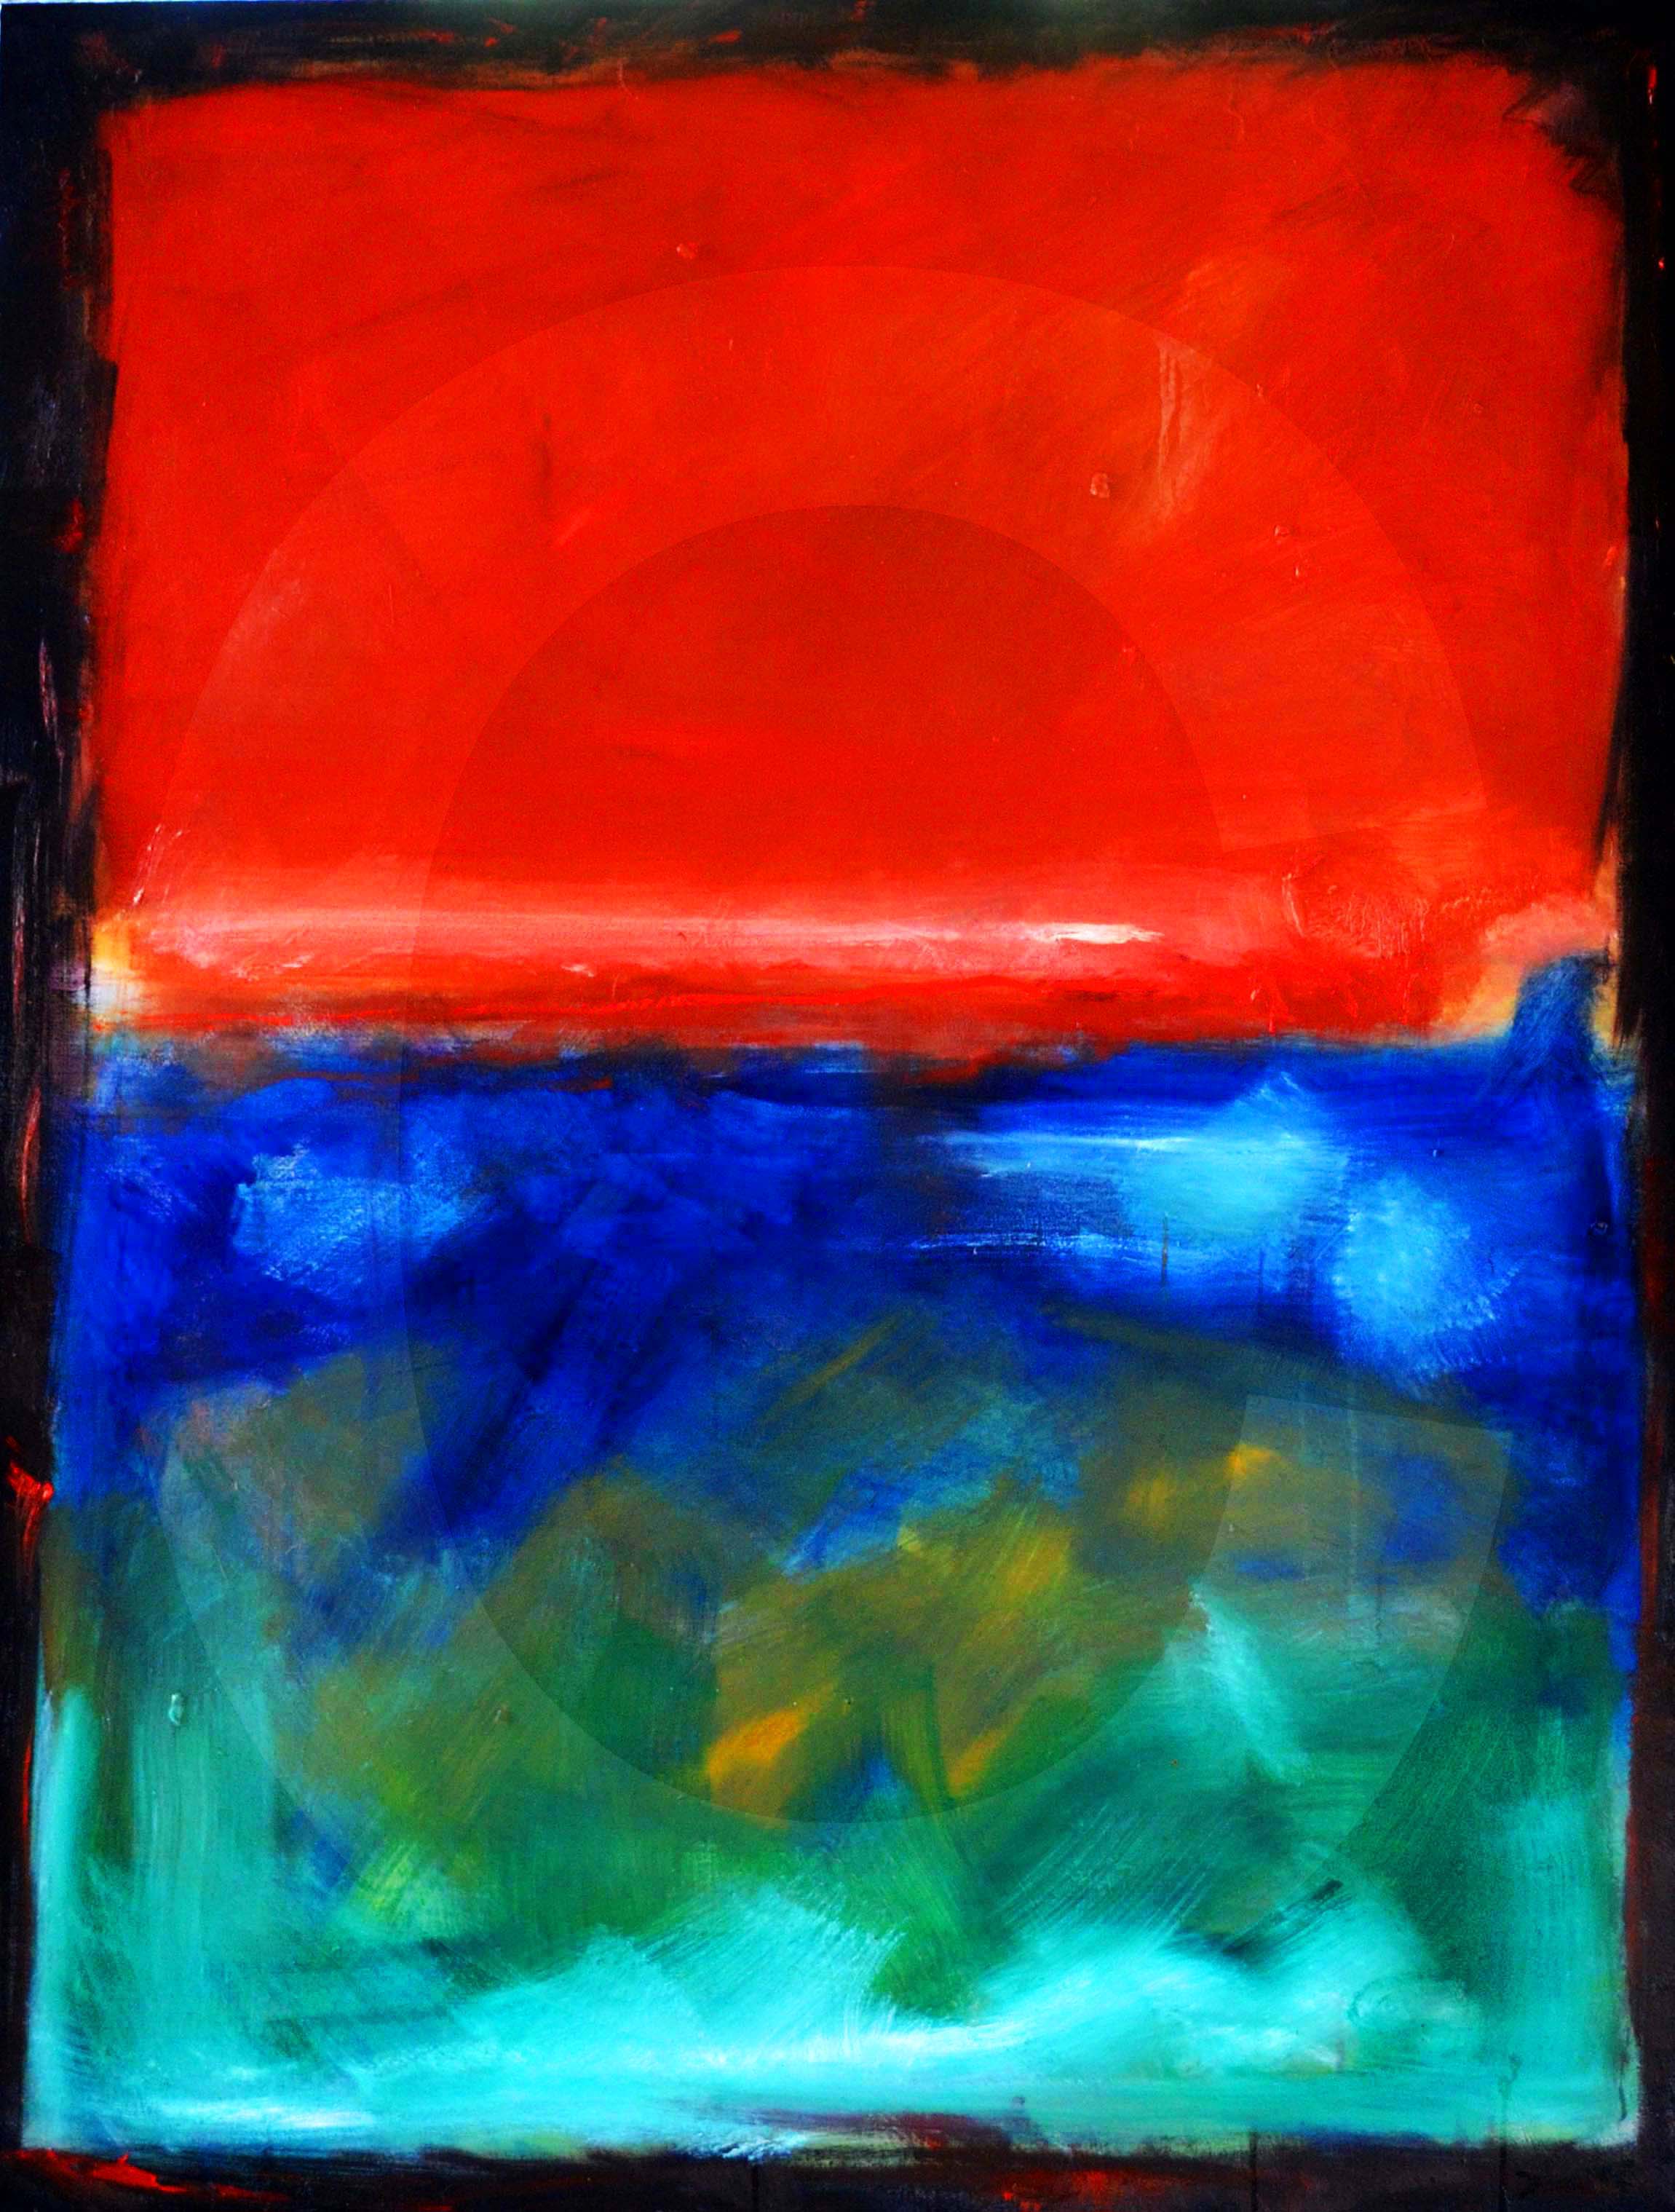 what-is-abstract-expressionism-see-examples-learn-about-art-1930-1940-1950-rothko